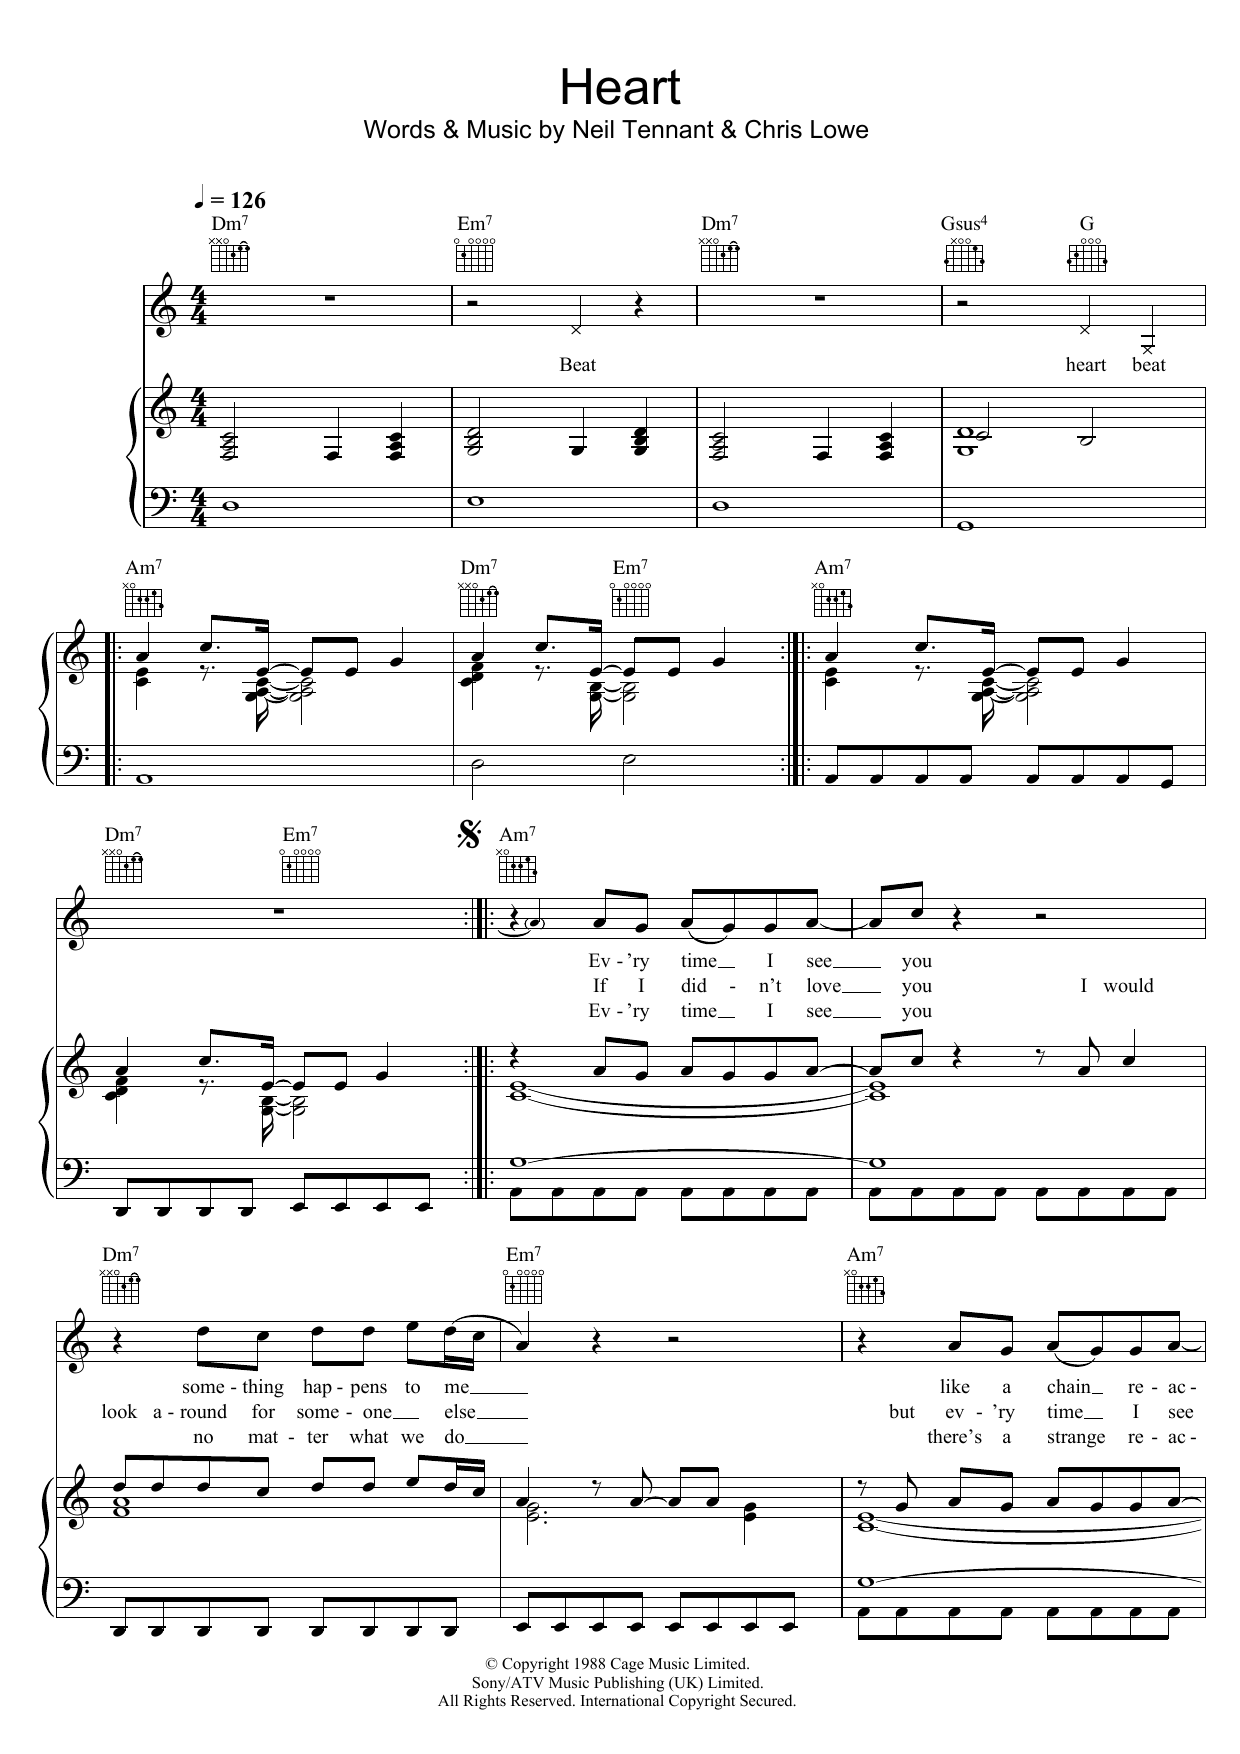 Pet Shop Boys Heart sheet music notes and chords. Download Printable PDF.